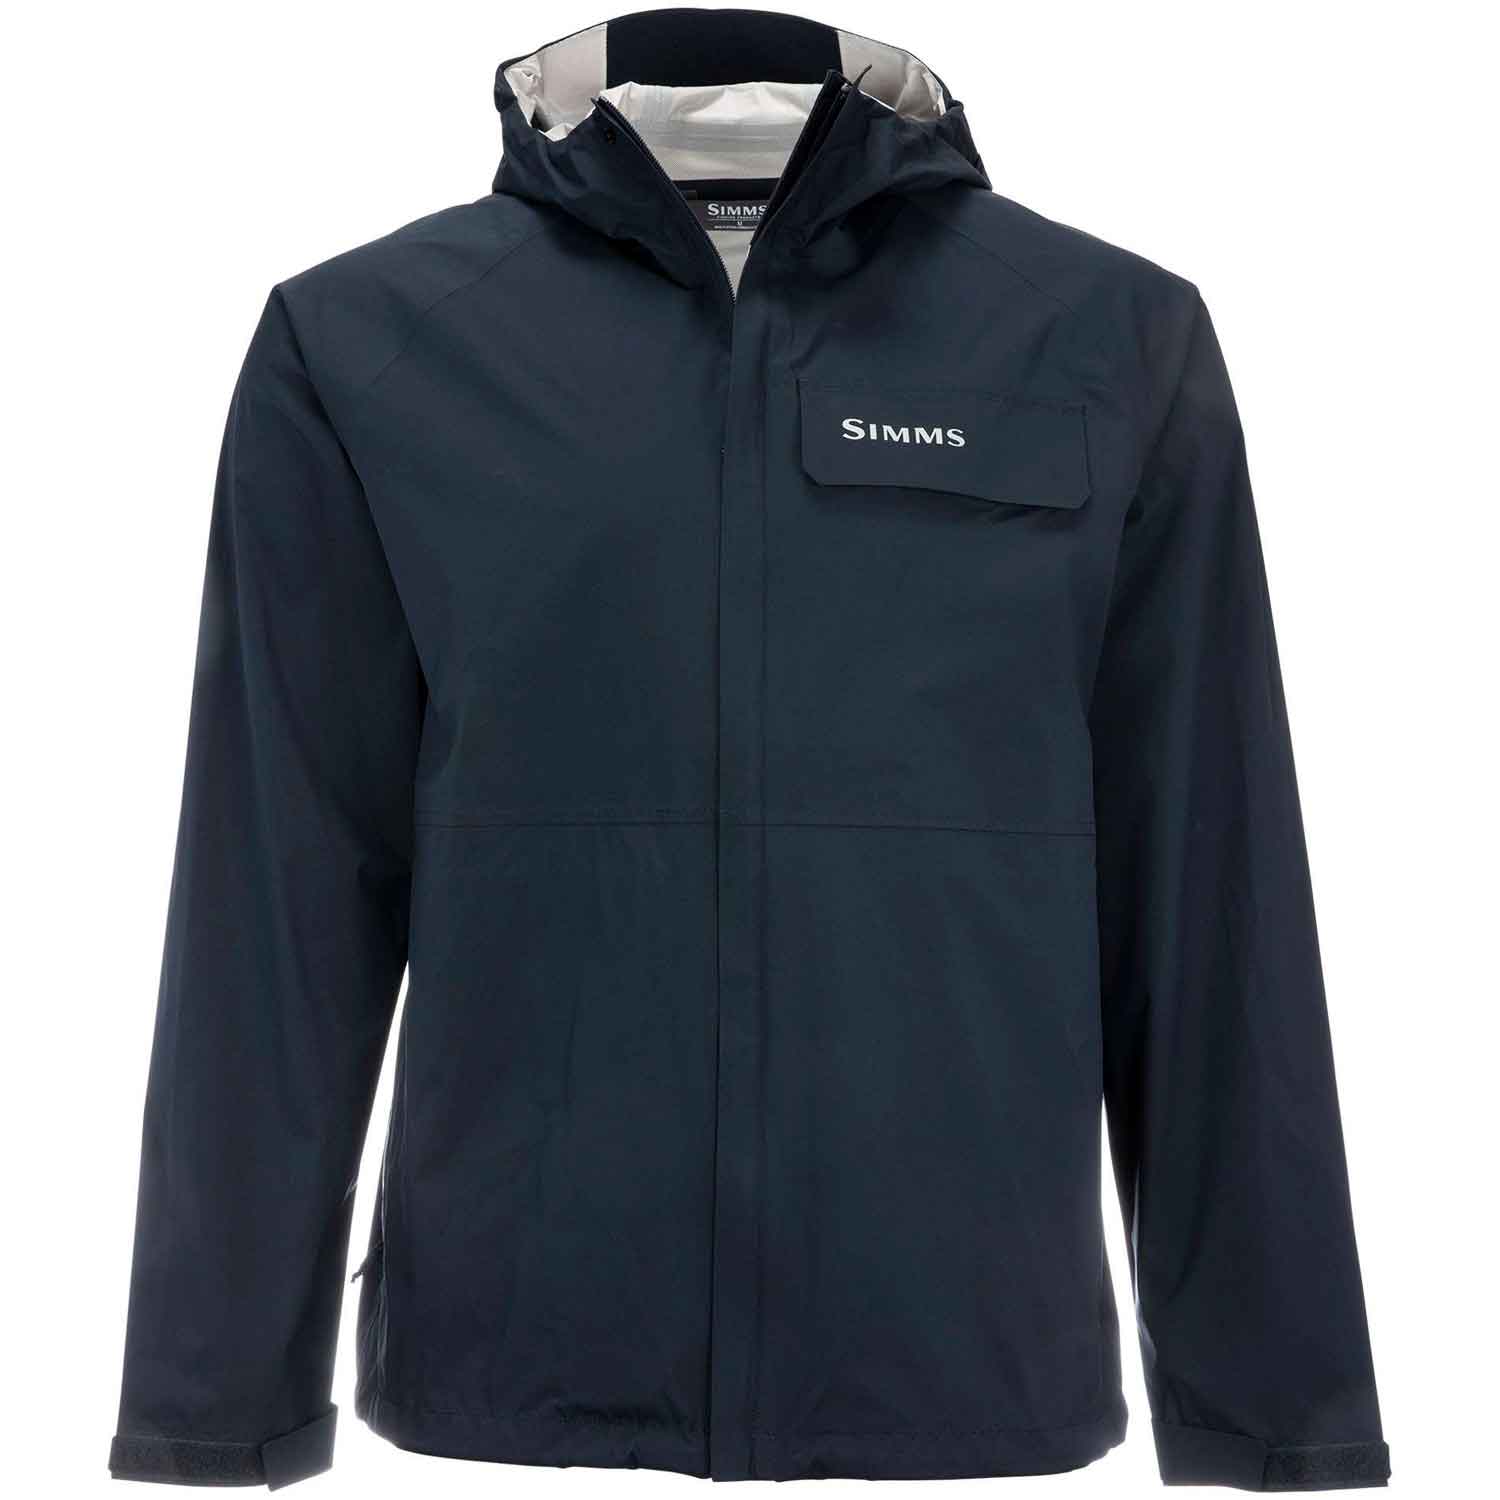 Outerwear Clothing Clearance - Men's & Women's